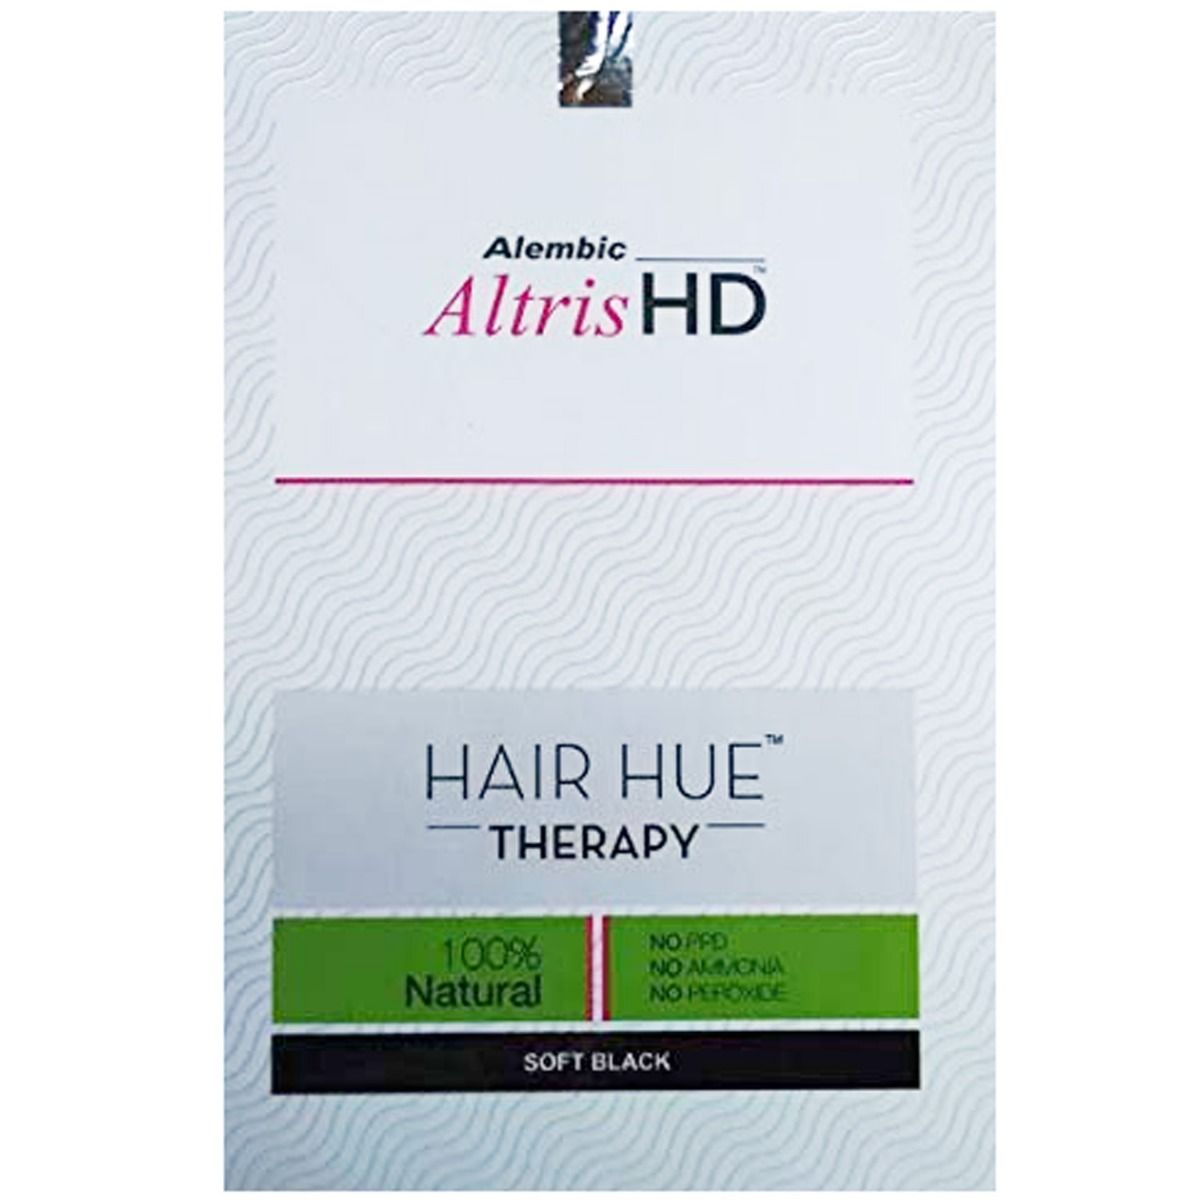 Buy Altris Hd Hair Hue Therapy Soft Black hair Color, 1 Count Online